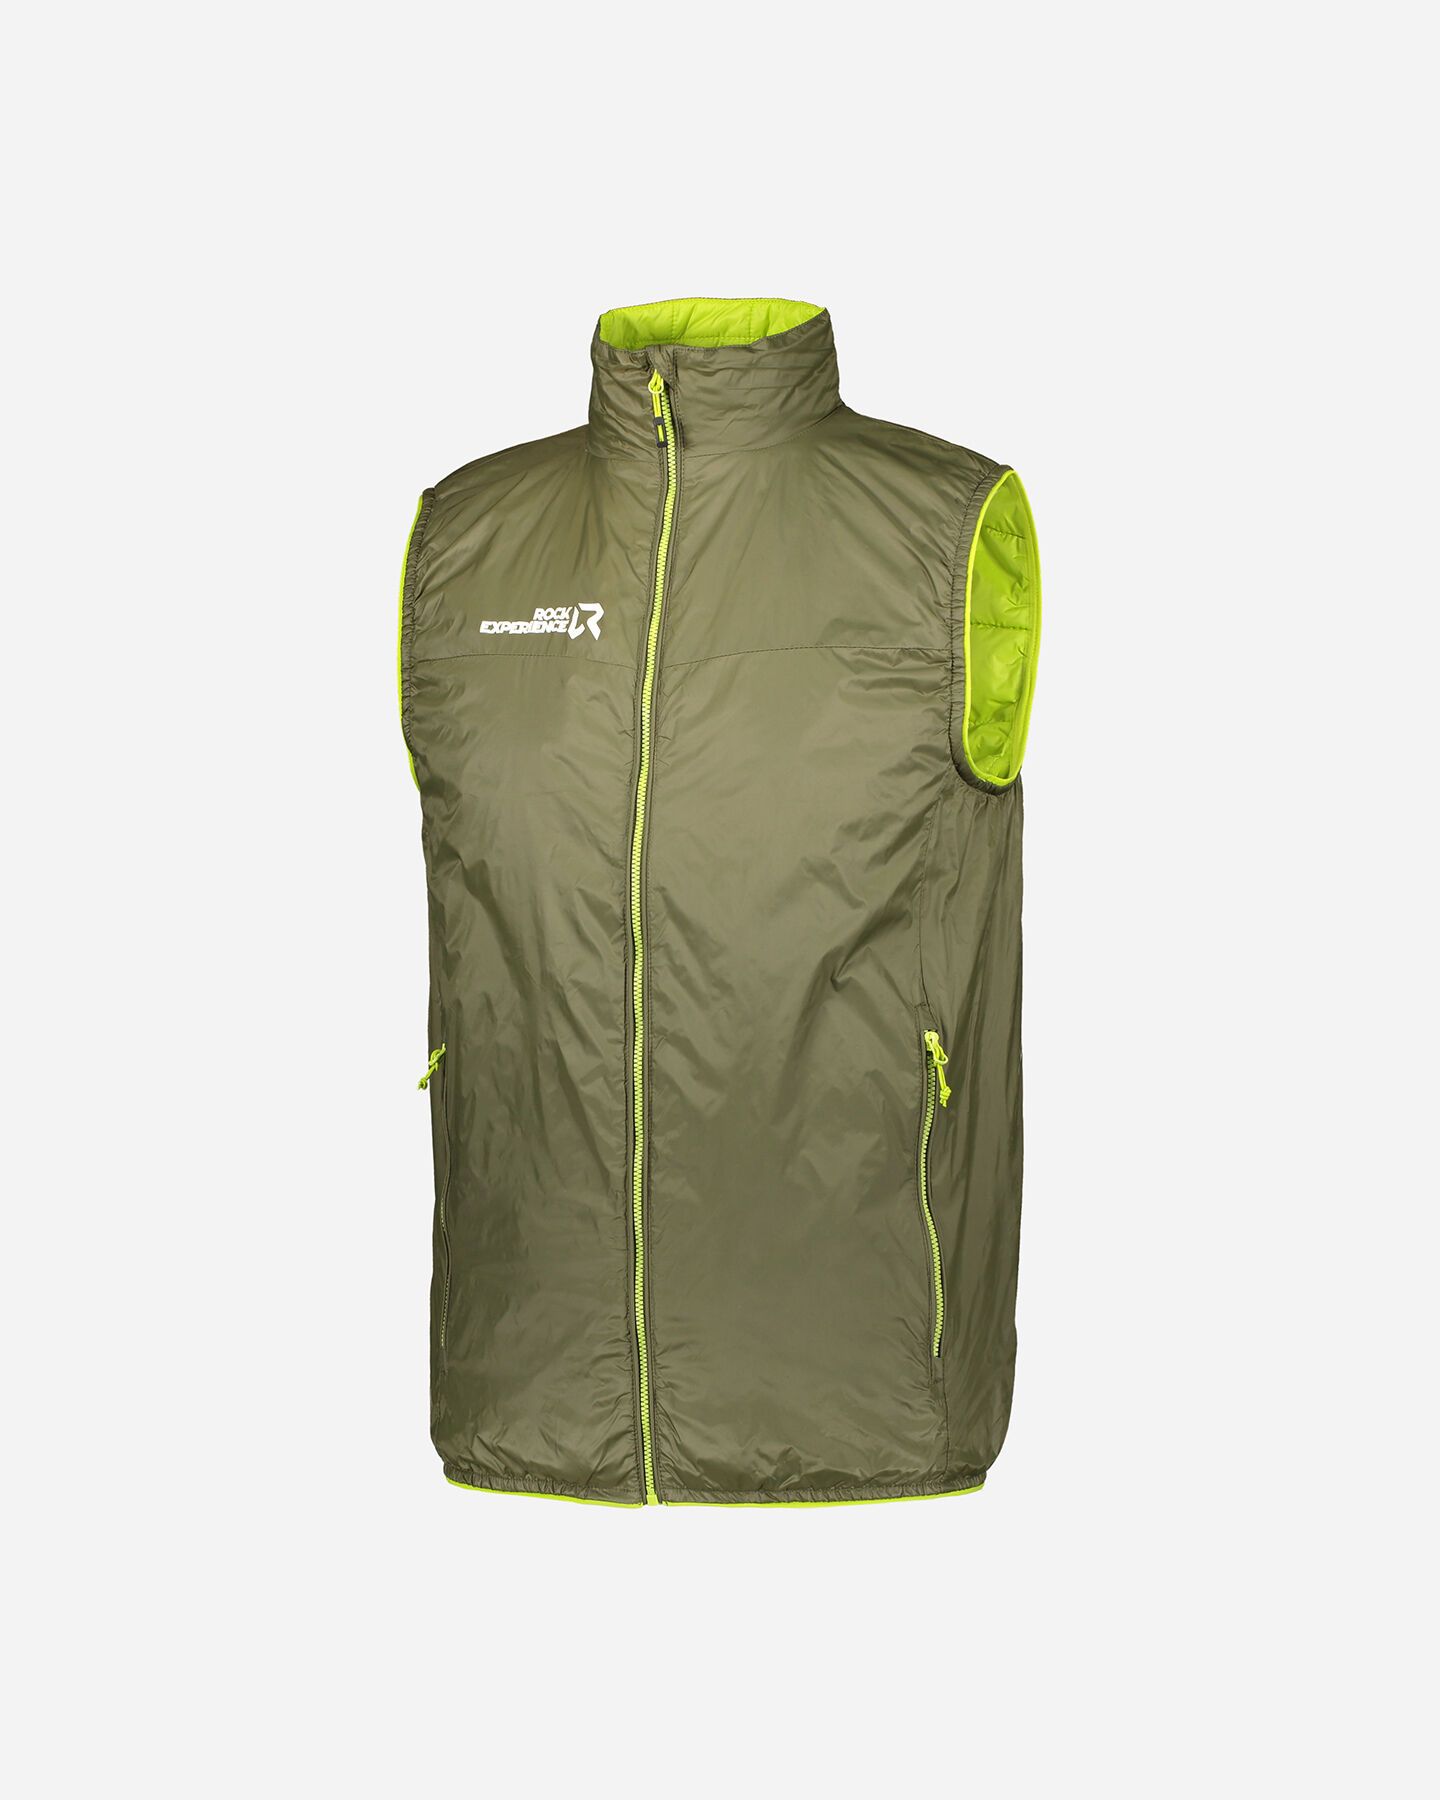  Gilet ROCK EXPERIENCE CAMP 4 PADDED M S4089948|1|S scatto 0